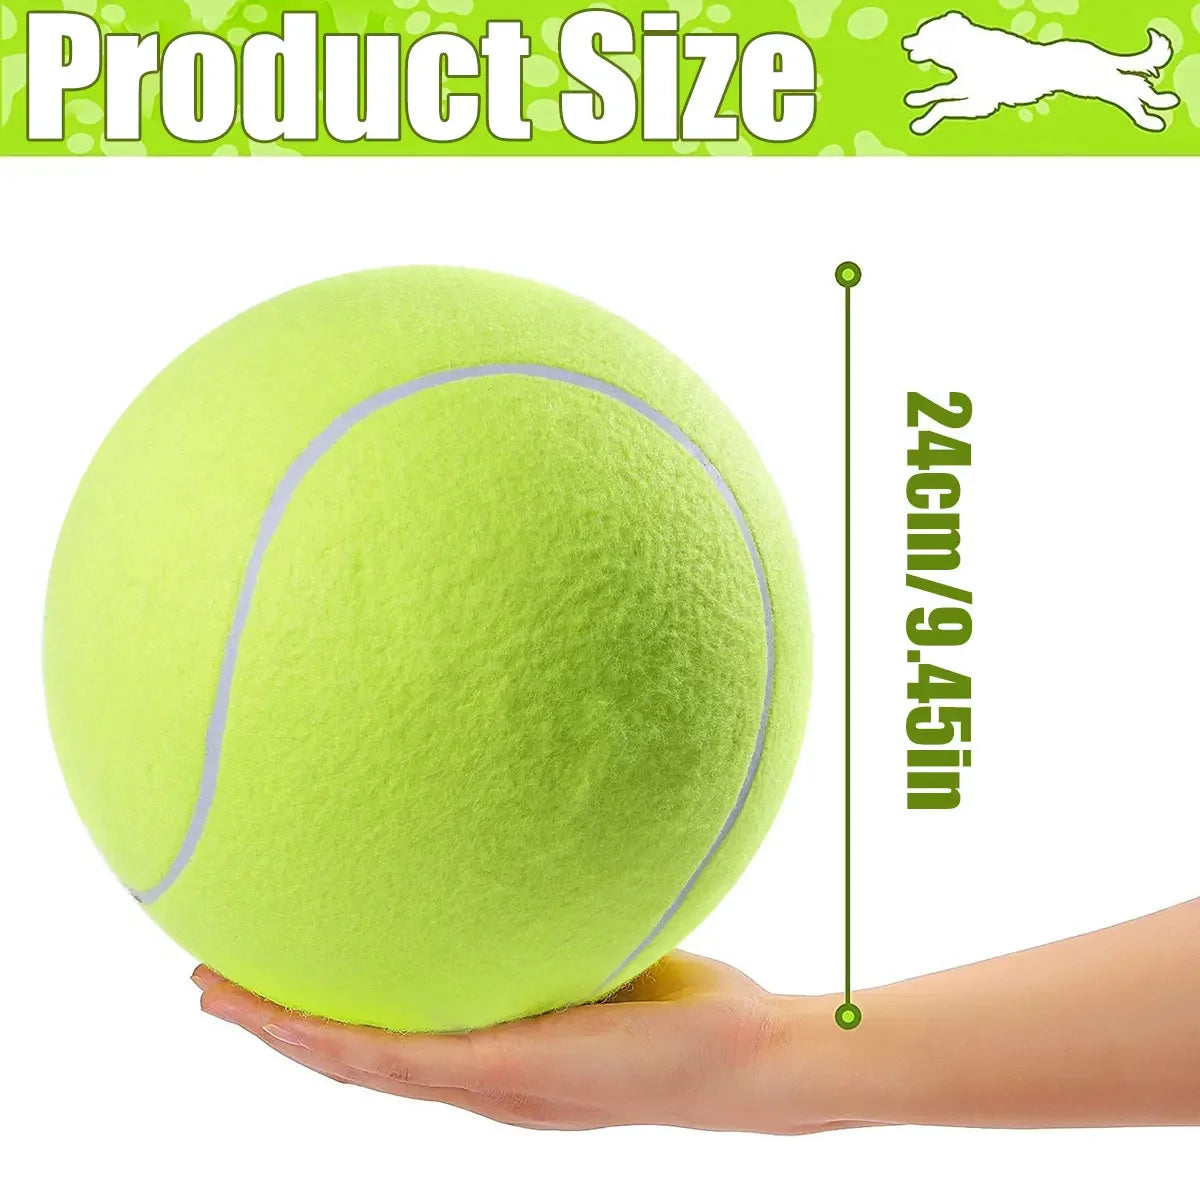 Ultra-Durable Giant Tennis Ball for Pets